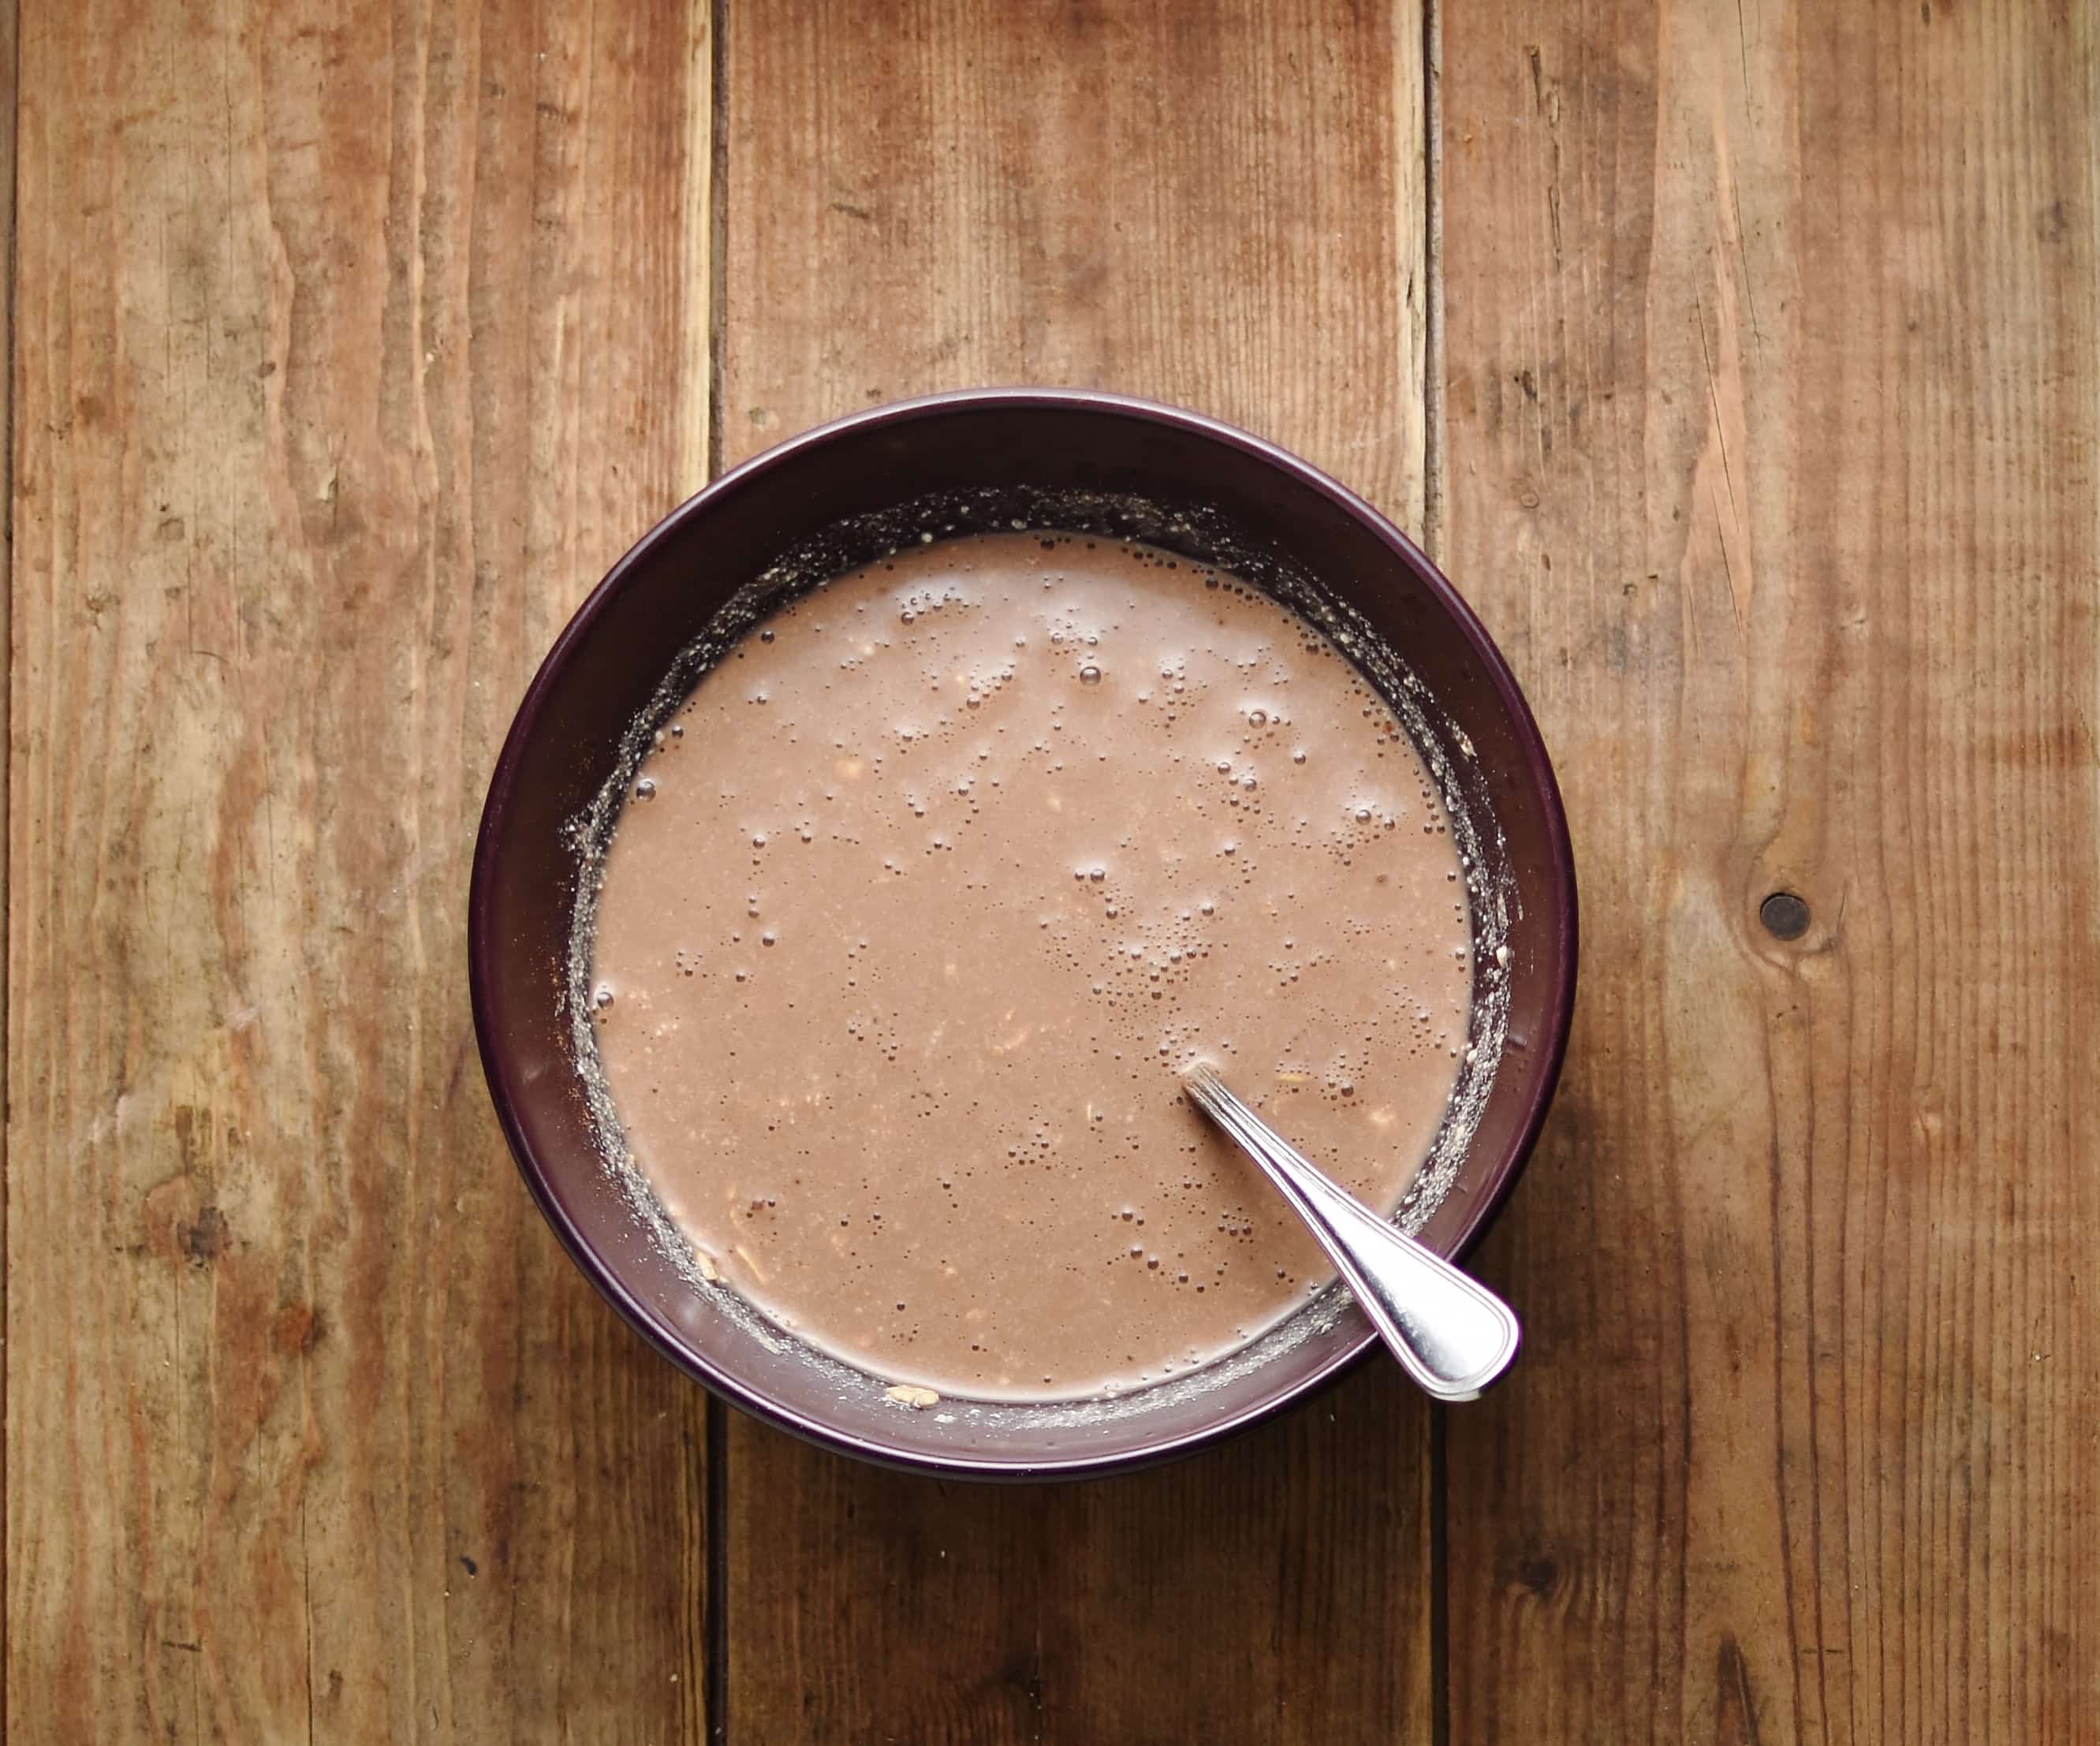 Chocolate overnight oats mixture with spoon inside purple bowl.